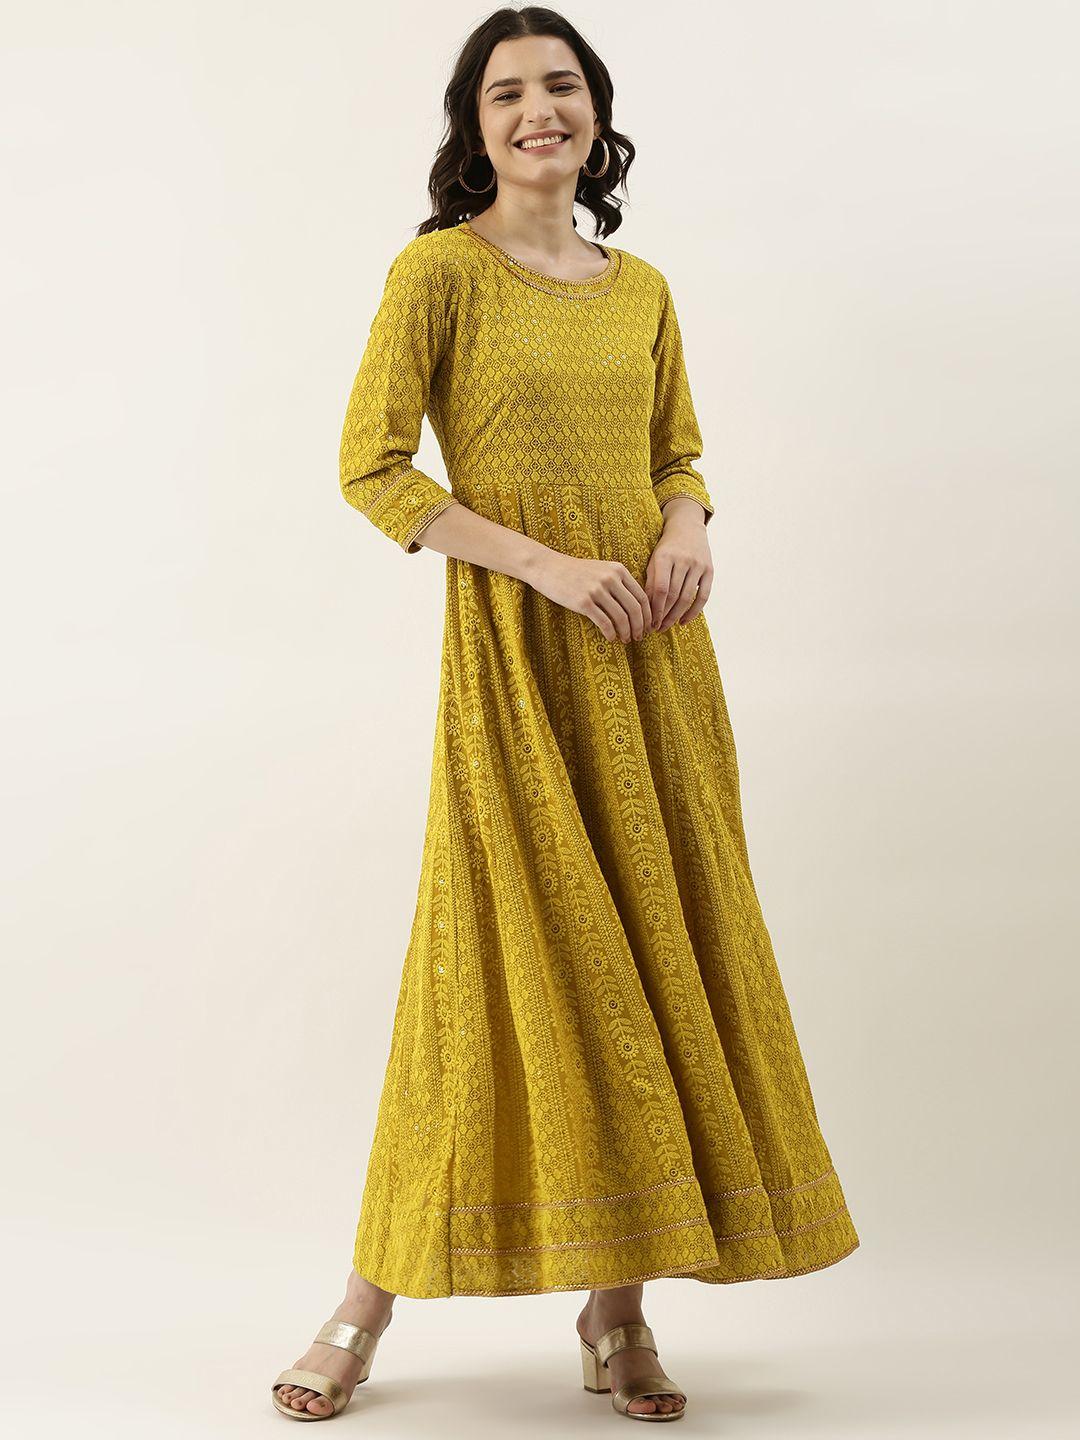 swagg-india-mustard-yellow-ethnic-motifs-embroidered-georgette-ethnic-maxi-dress